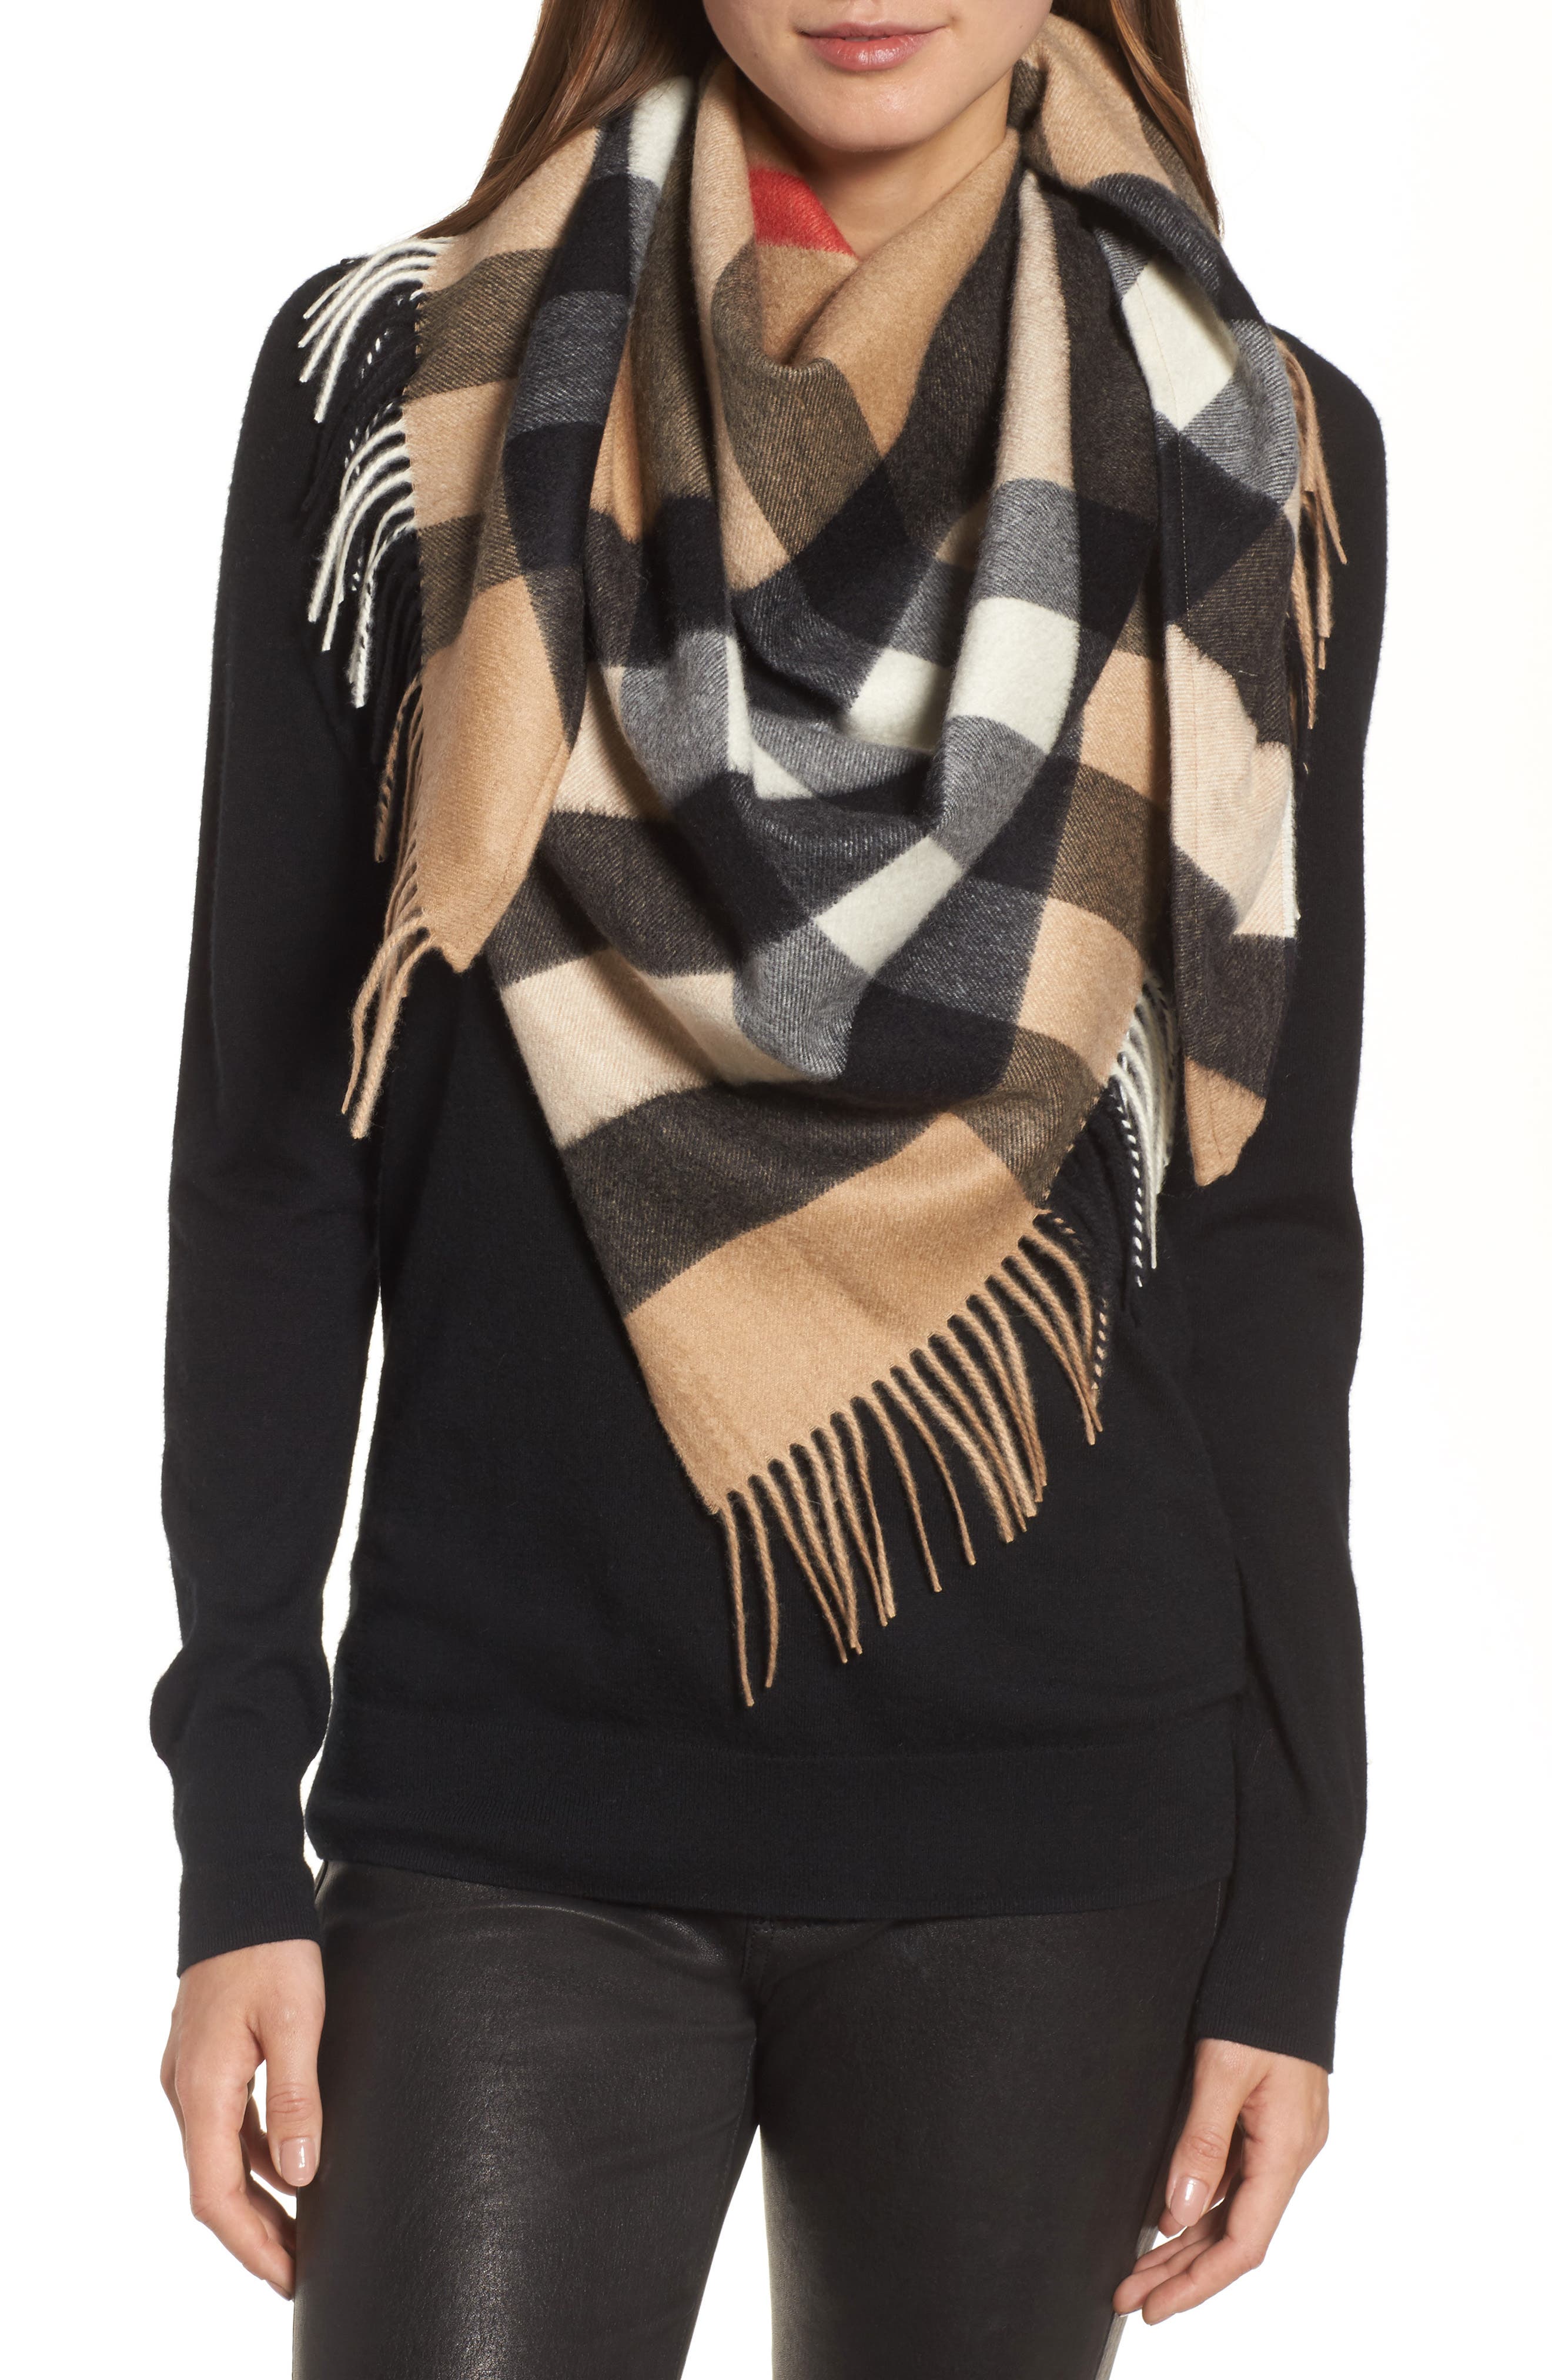 burberry scarves & shawls